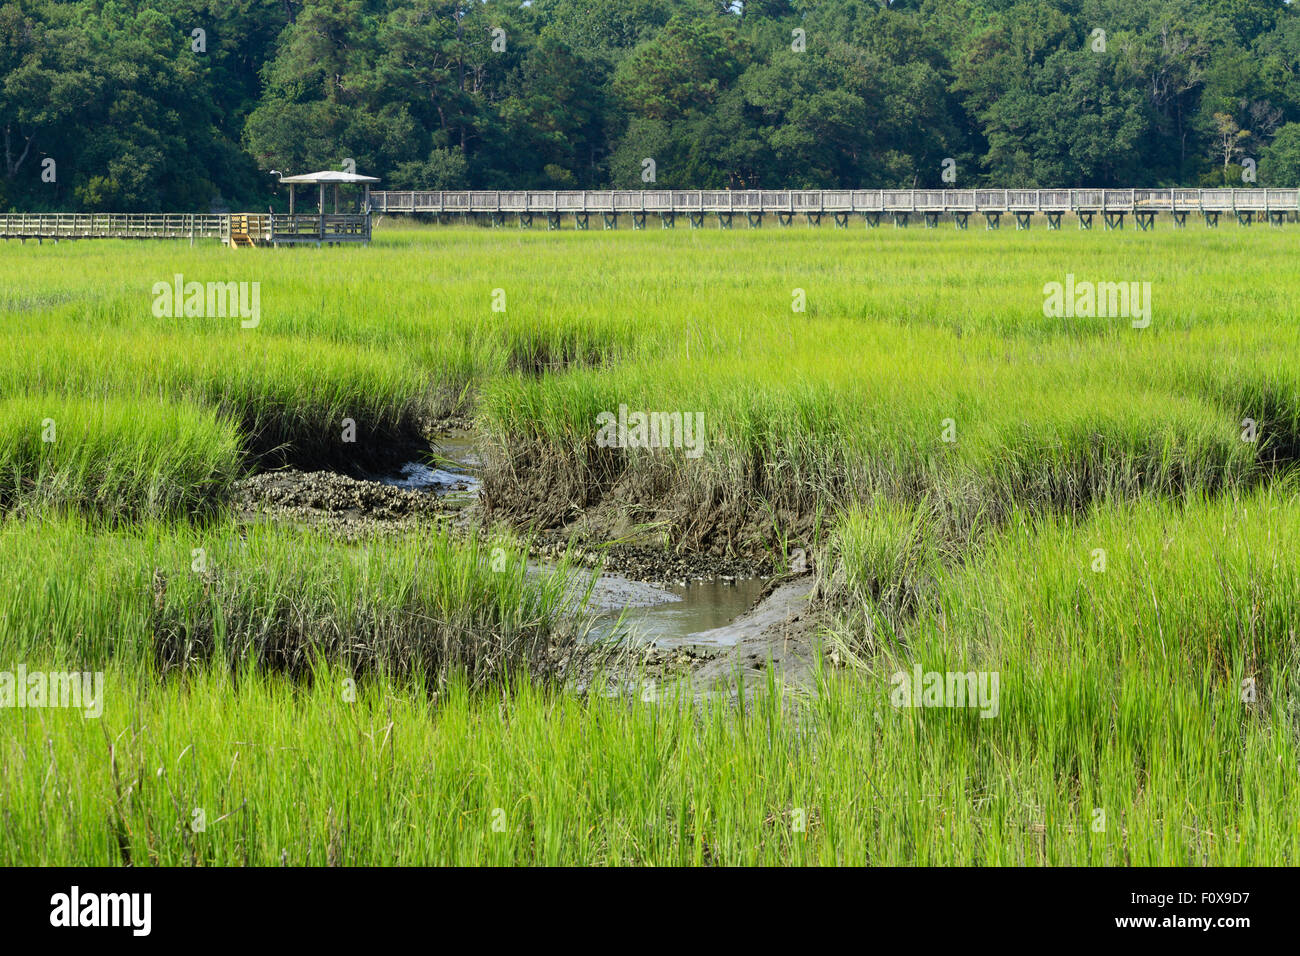 Two wooden docks jut out into the coastal inlet with acres of smooth cordgrass and oyster beds in the mud. Near Garden City, SC. Stock Photo